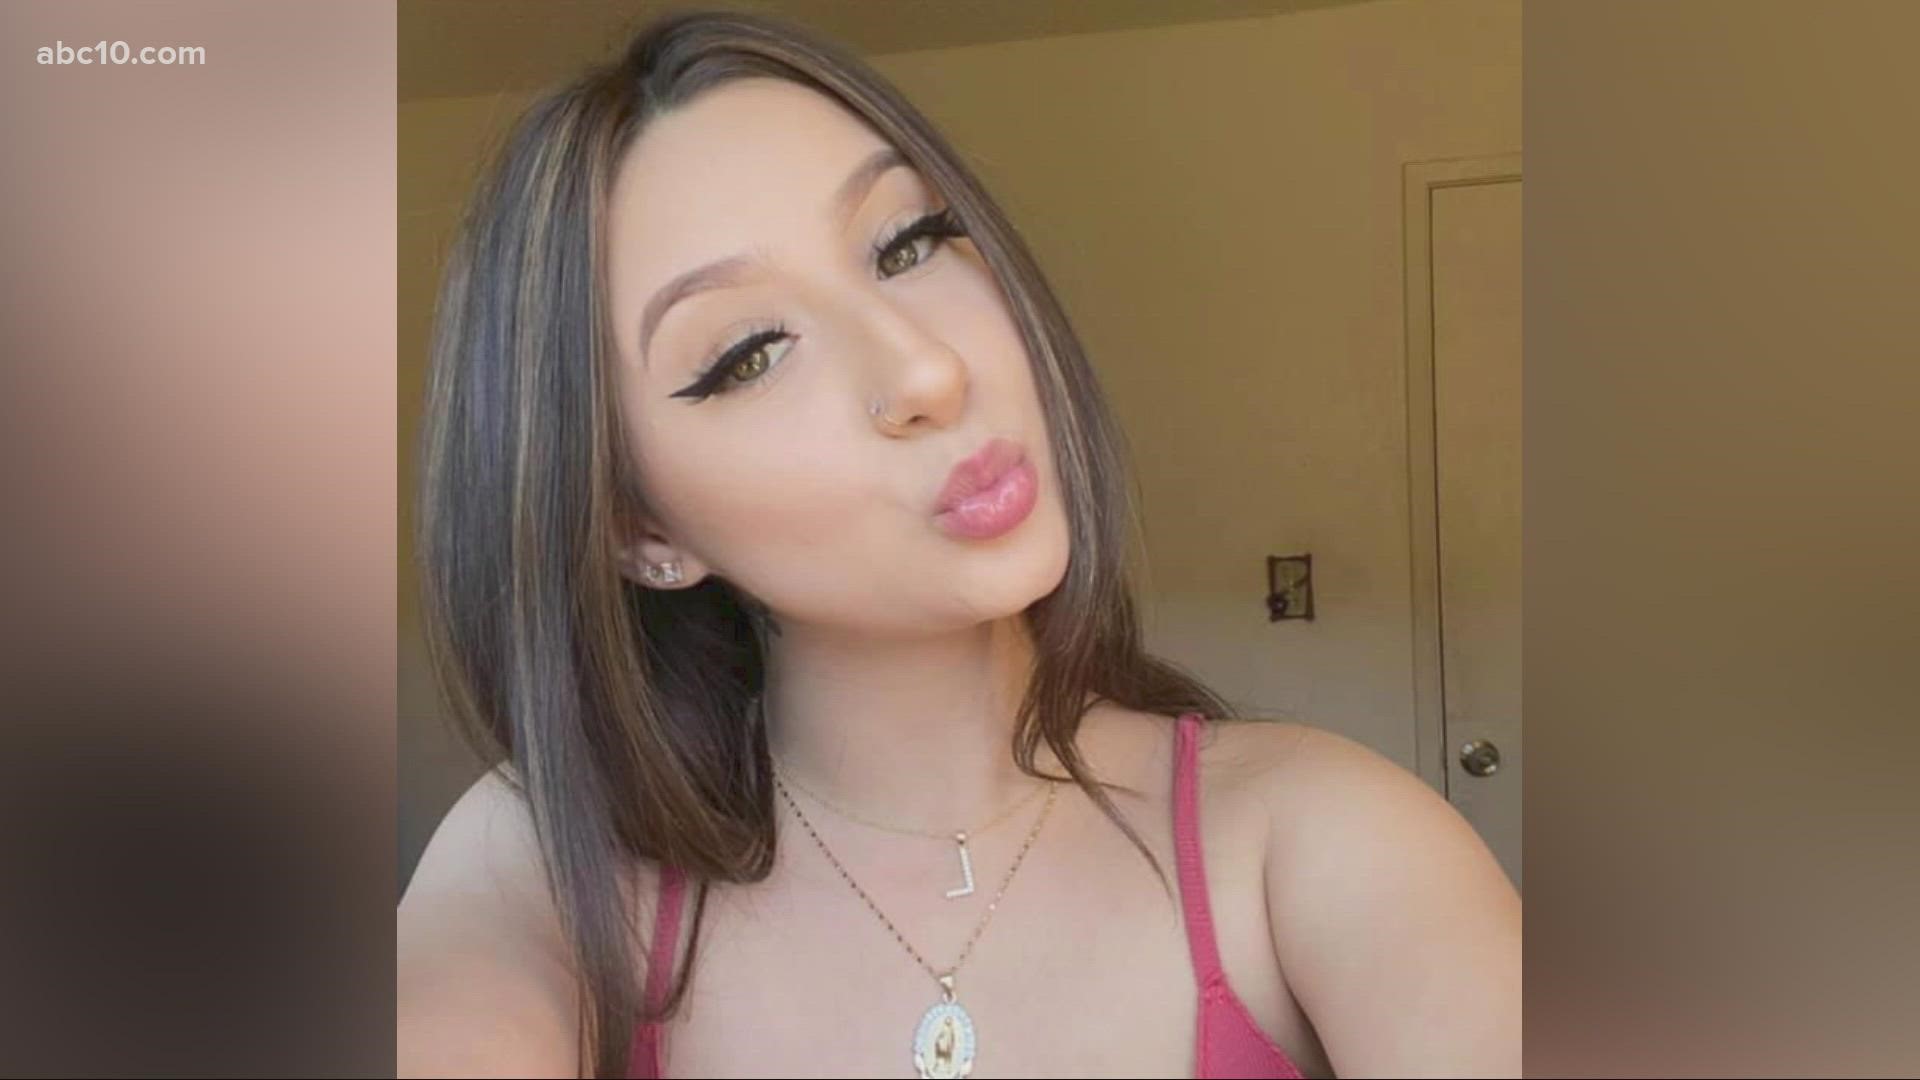 The remains of a 19-year-old Leilani Beauchamp of Carmel were found in Monterey County following a Halloween Party that took place in Sacramento.